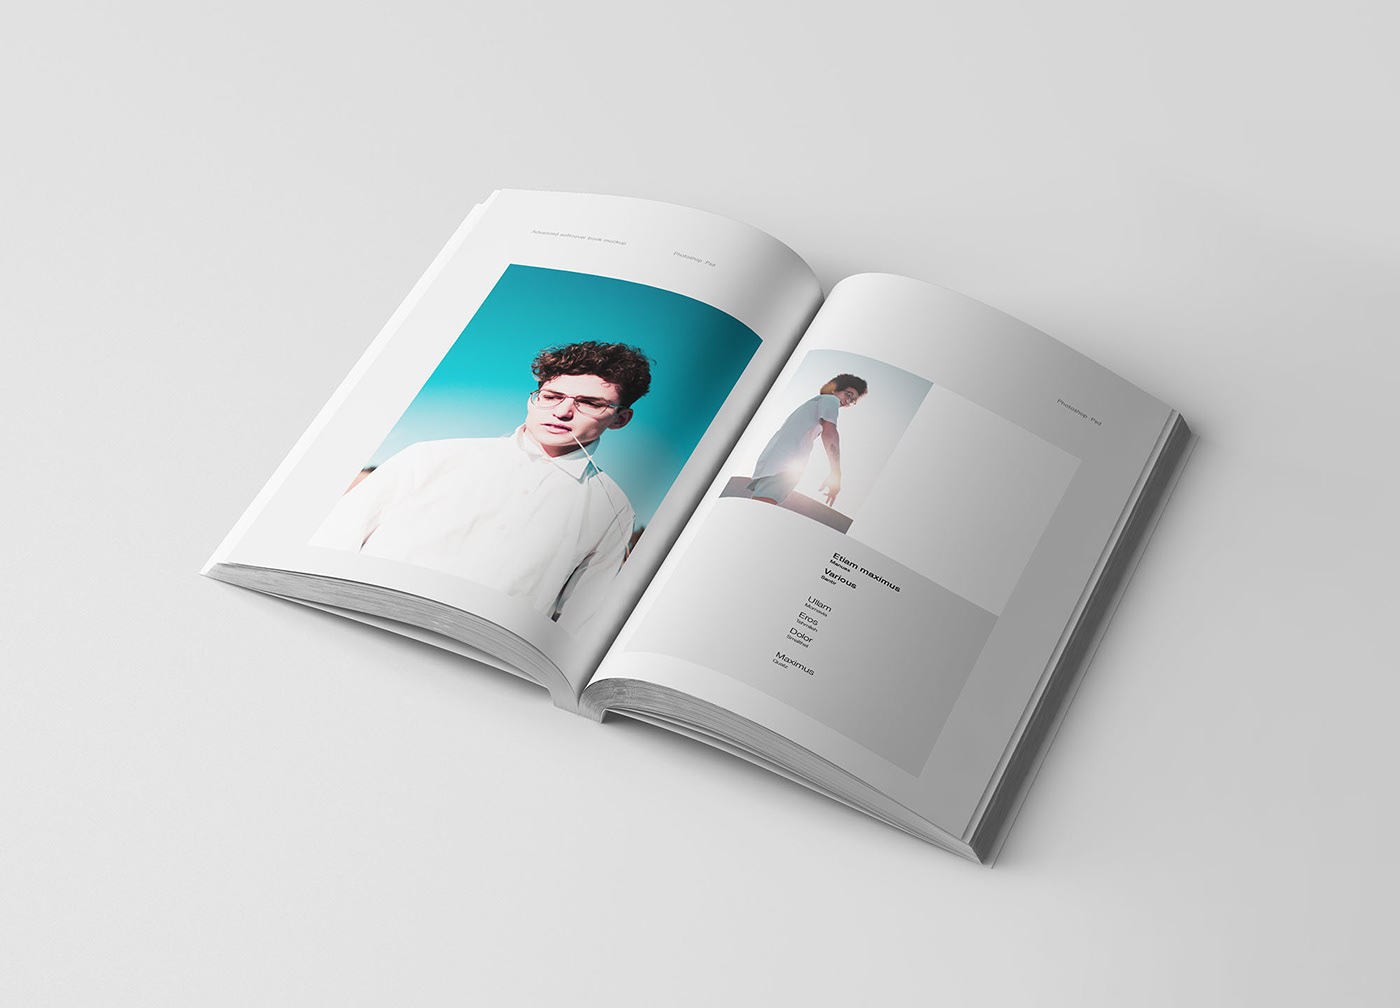 book softcover book download psd book book mockup a5 book mockup softcover book mockup free freebie free download